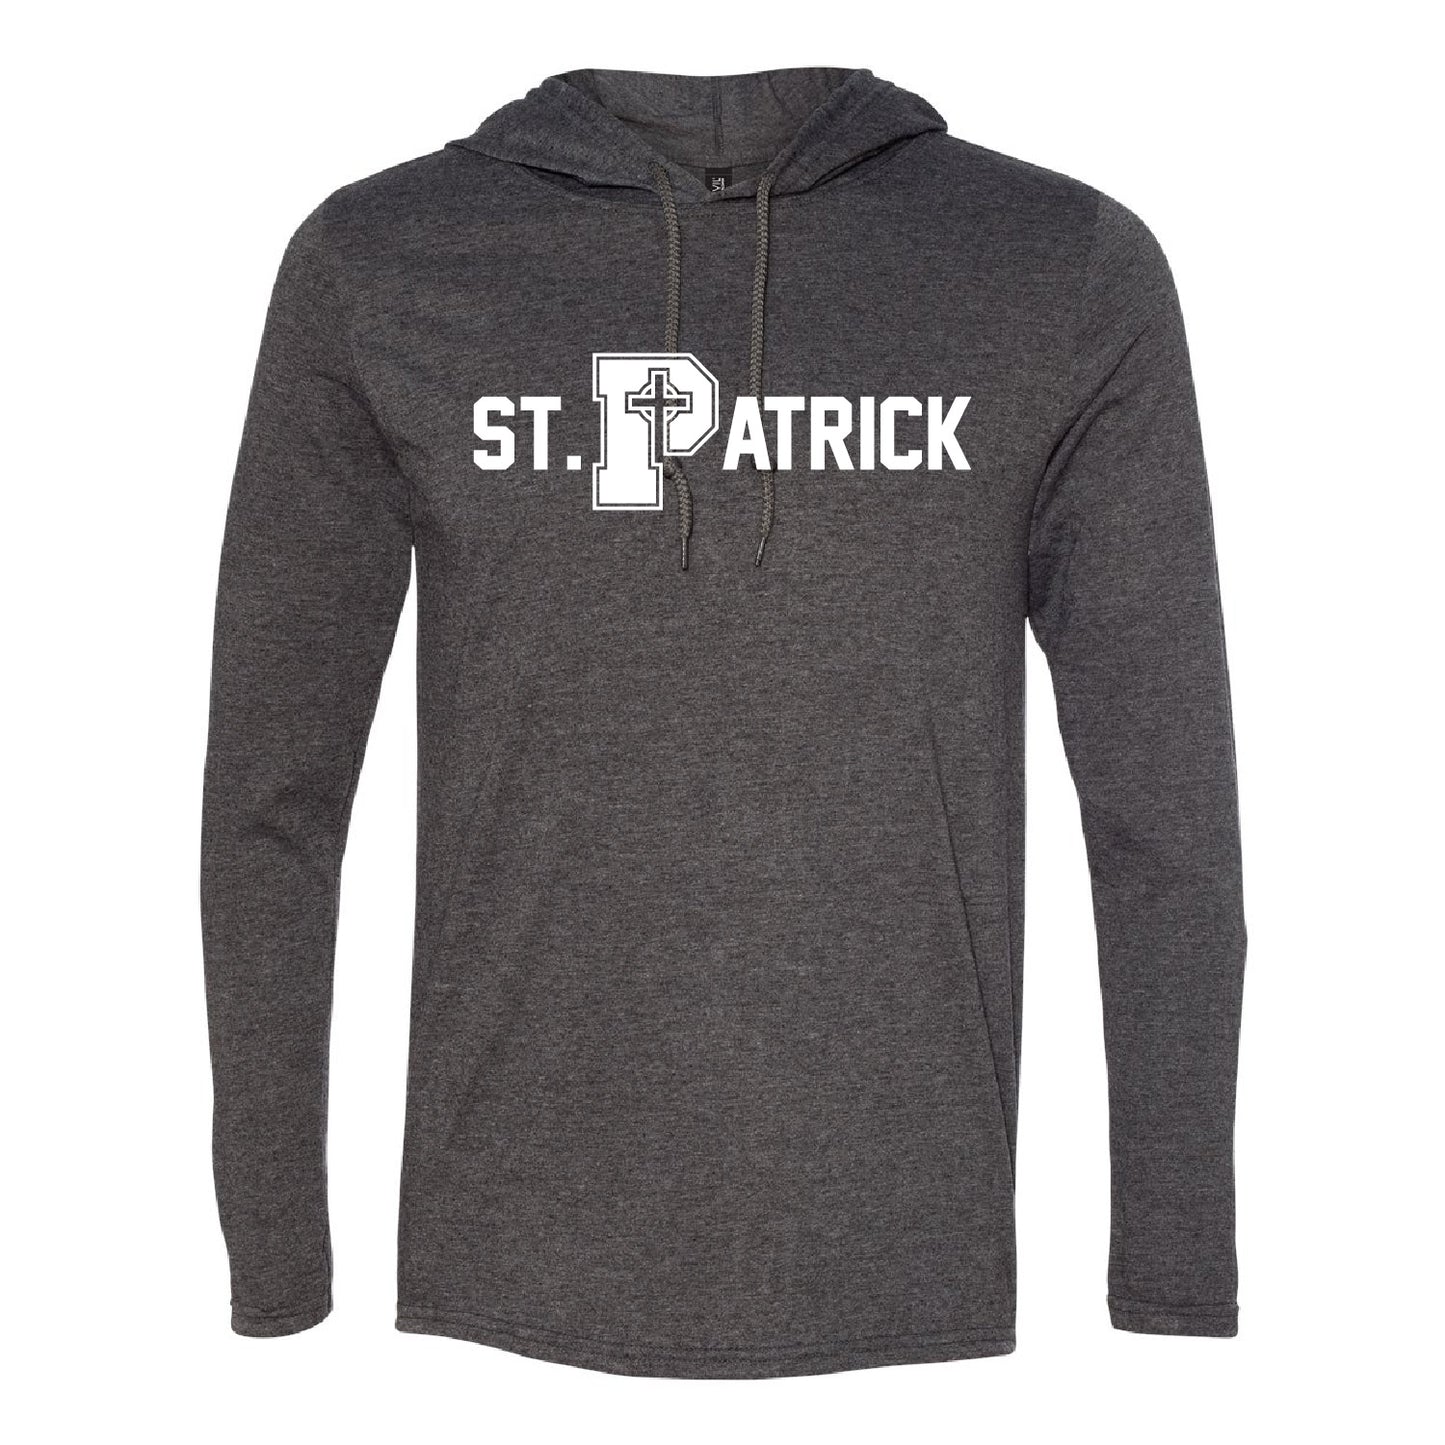 Lightweight Hooded Long Sleeve T-Shirt with St Patrick